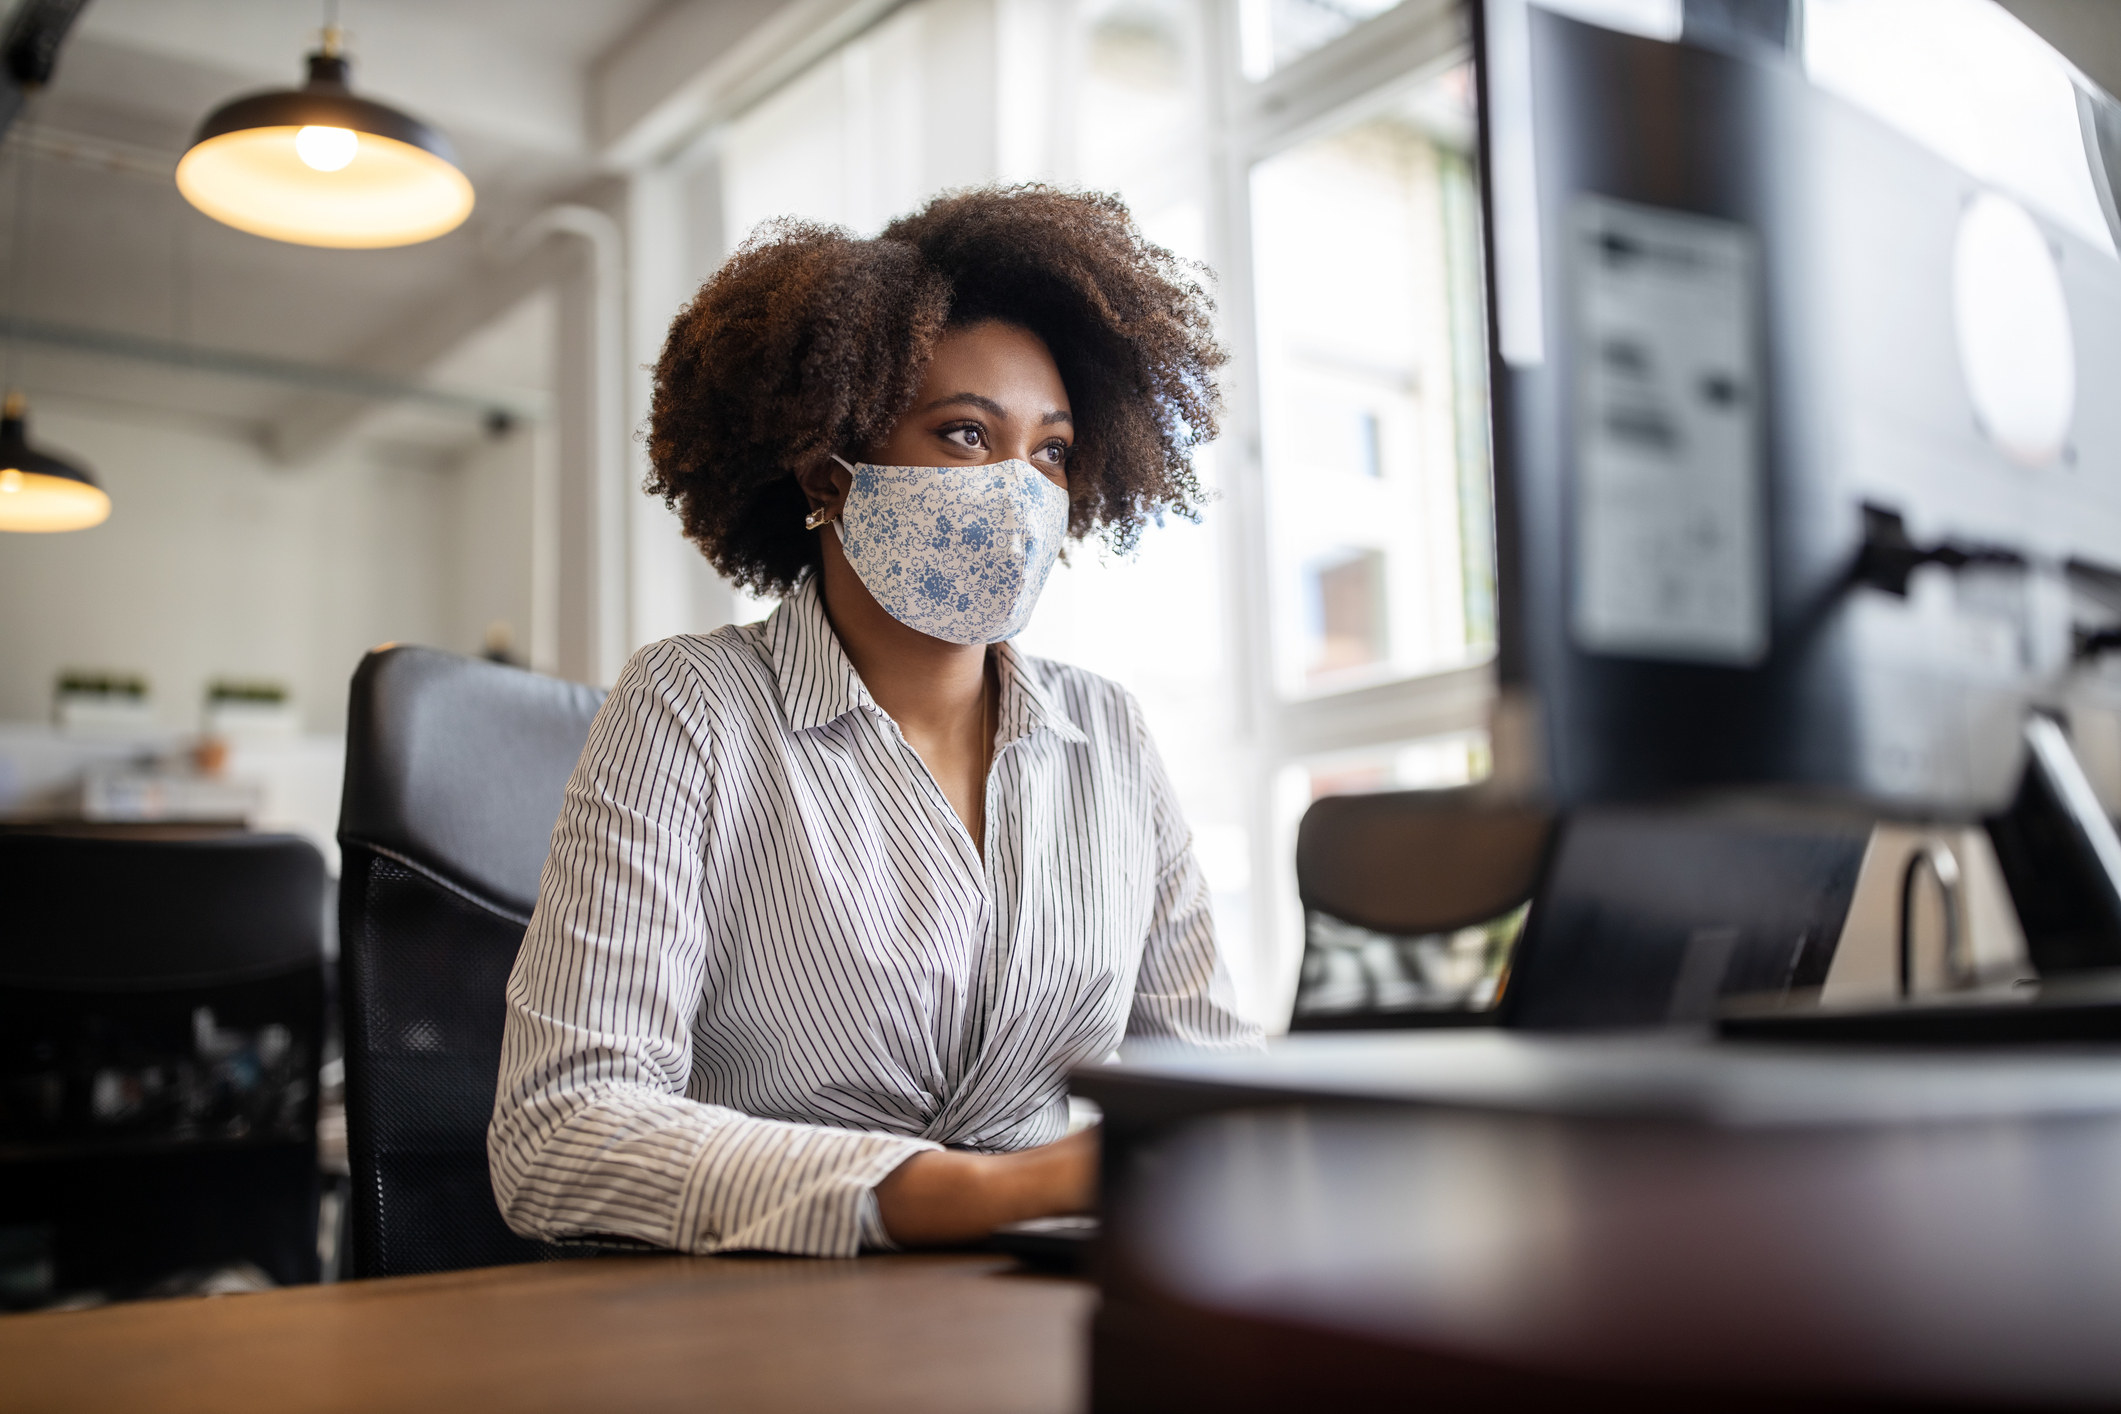 A woman wearing a face mask and working at her computer